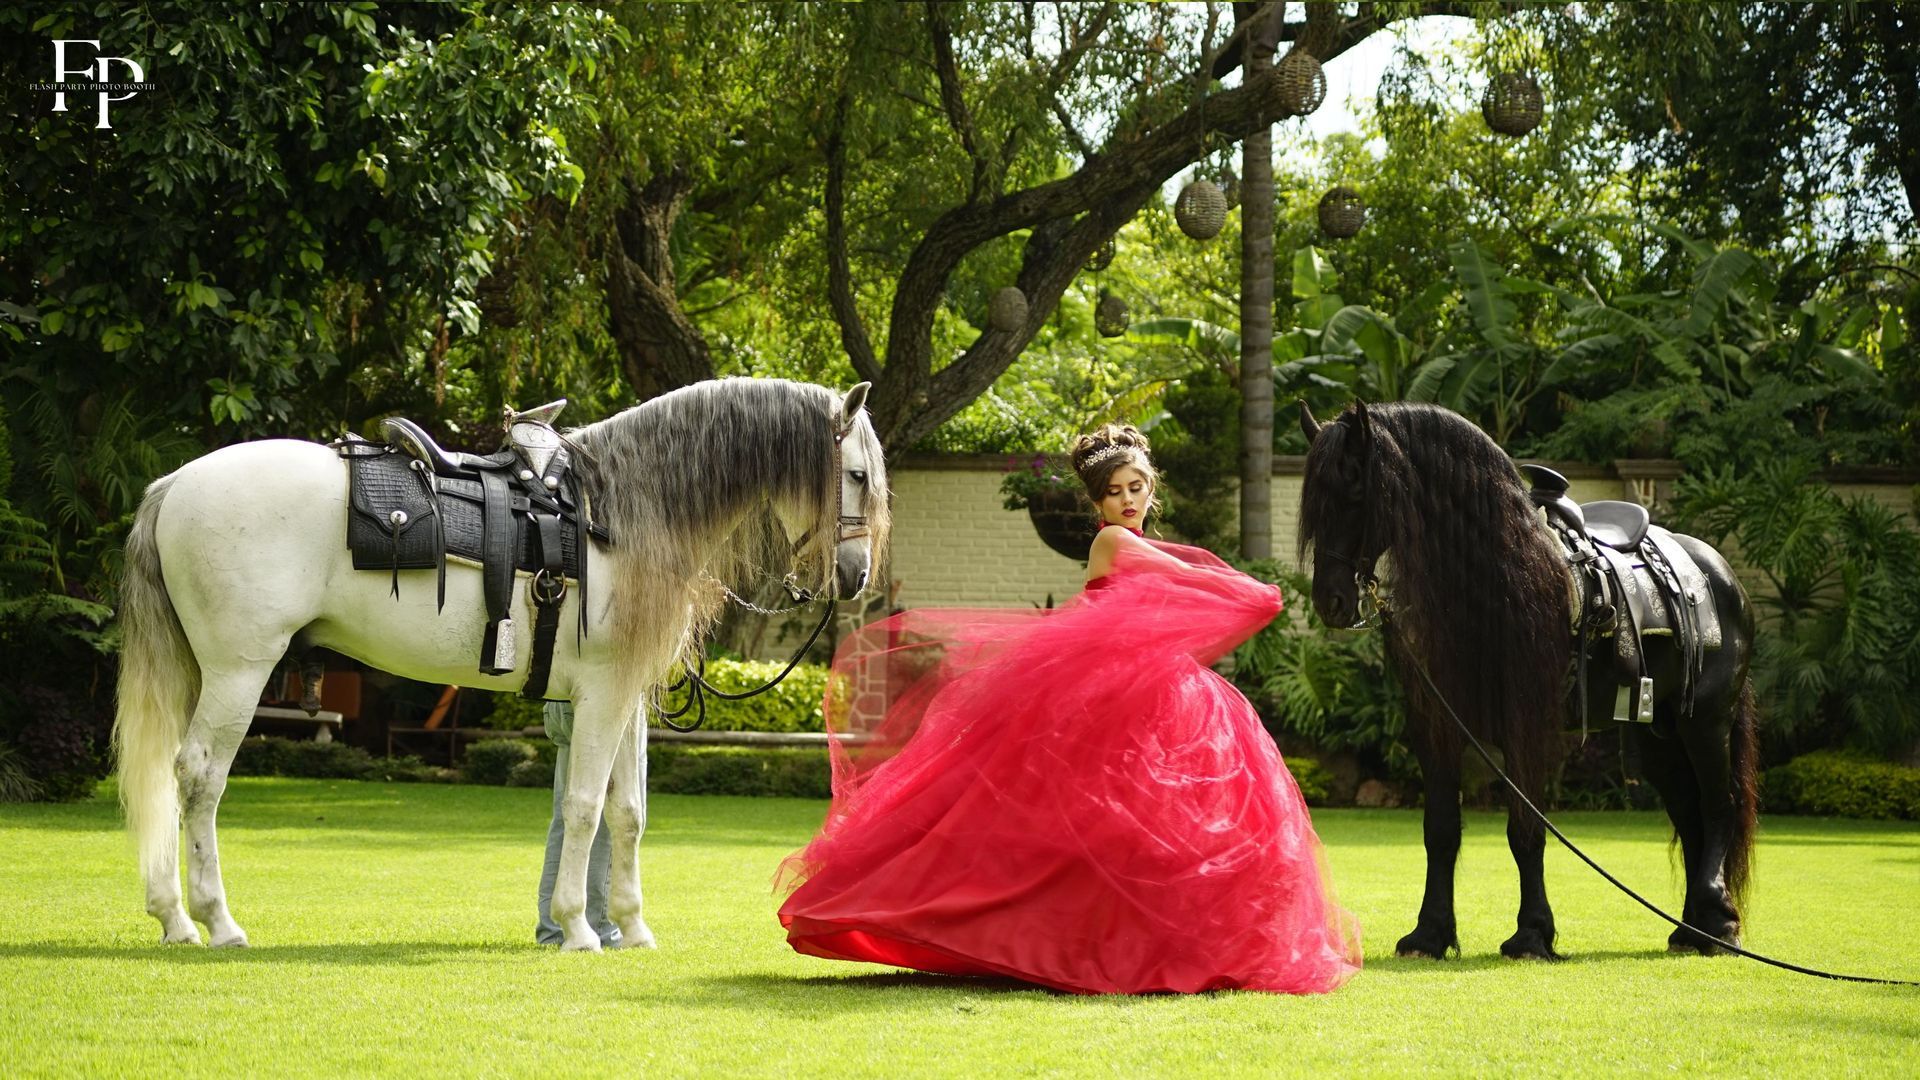 A celebrant in a red gown beside a white horse striking a pose for her quinceanera celebration at Manor